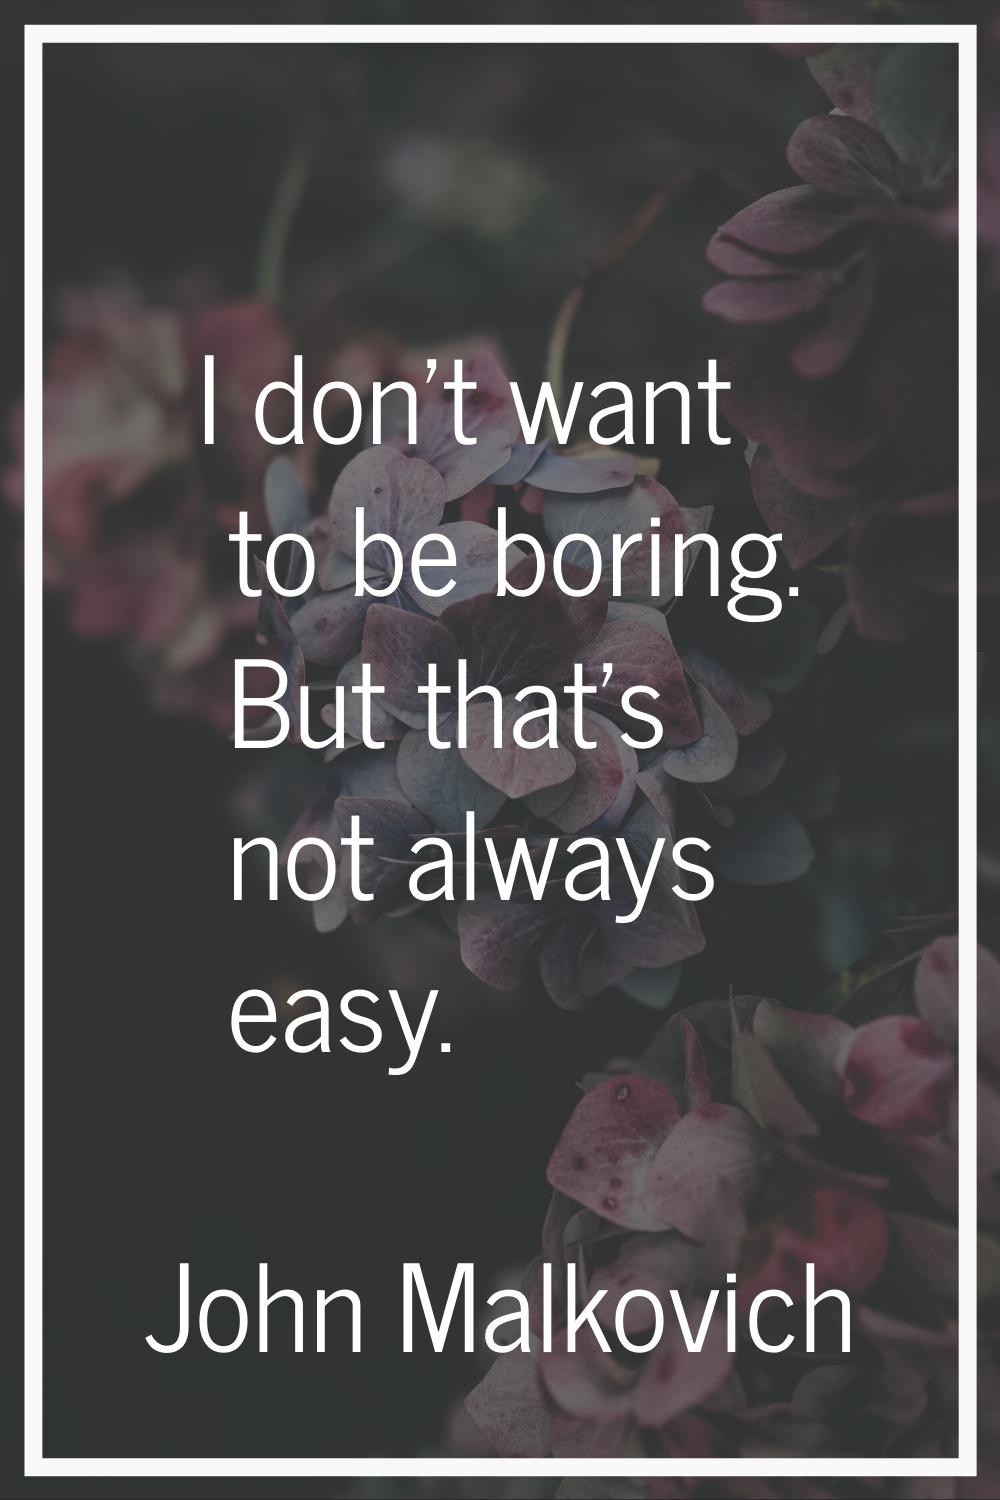 I don't want to be boring. But that's not always easy.